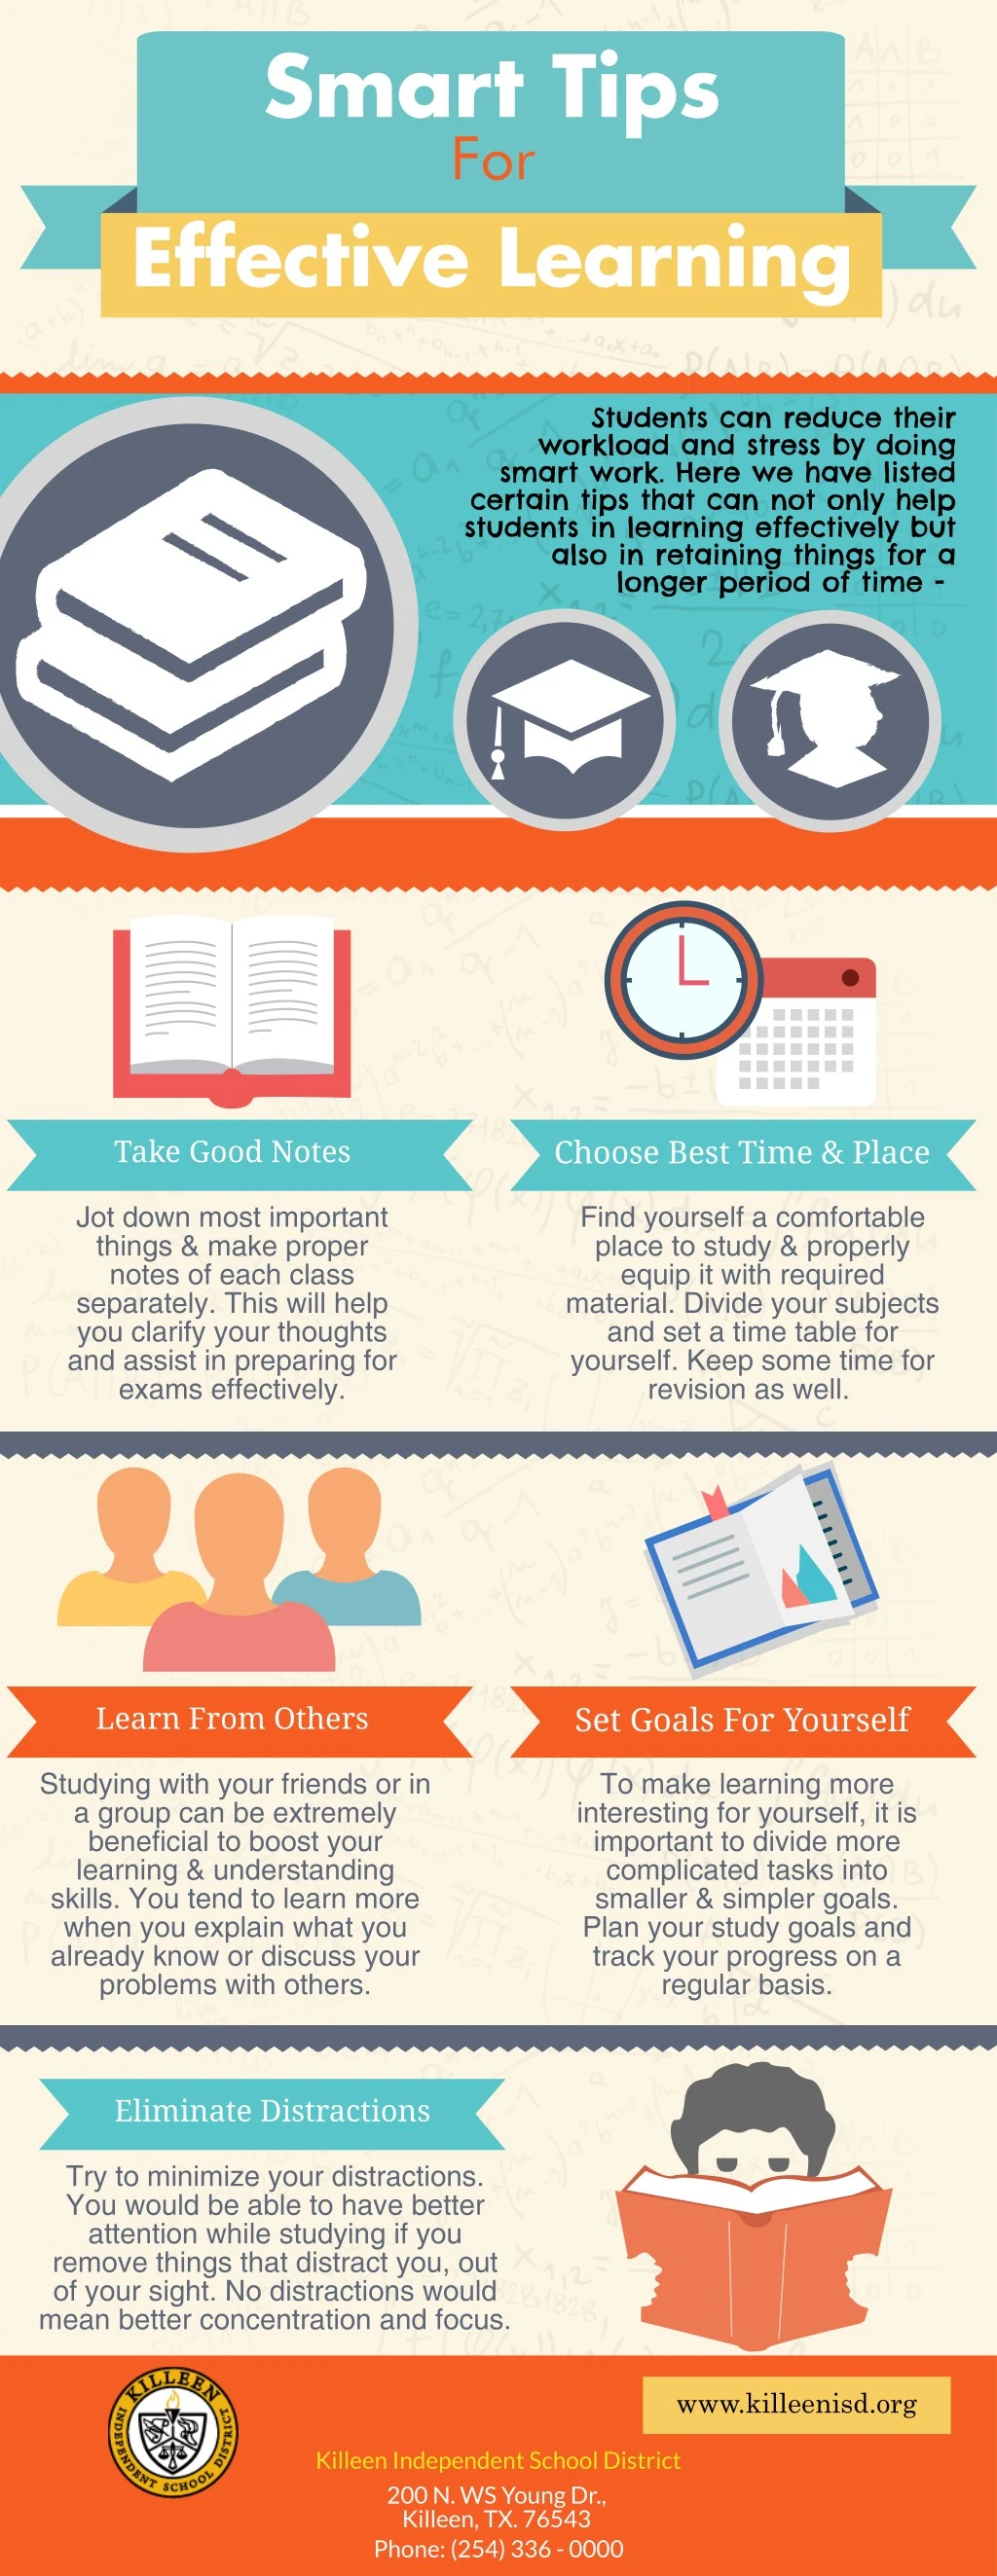 smart tips for effective learning